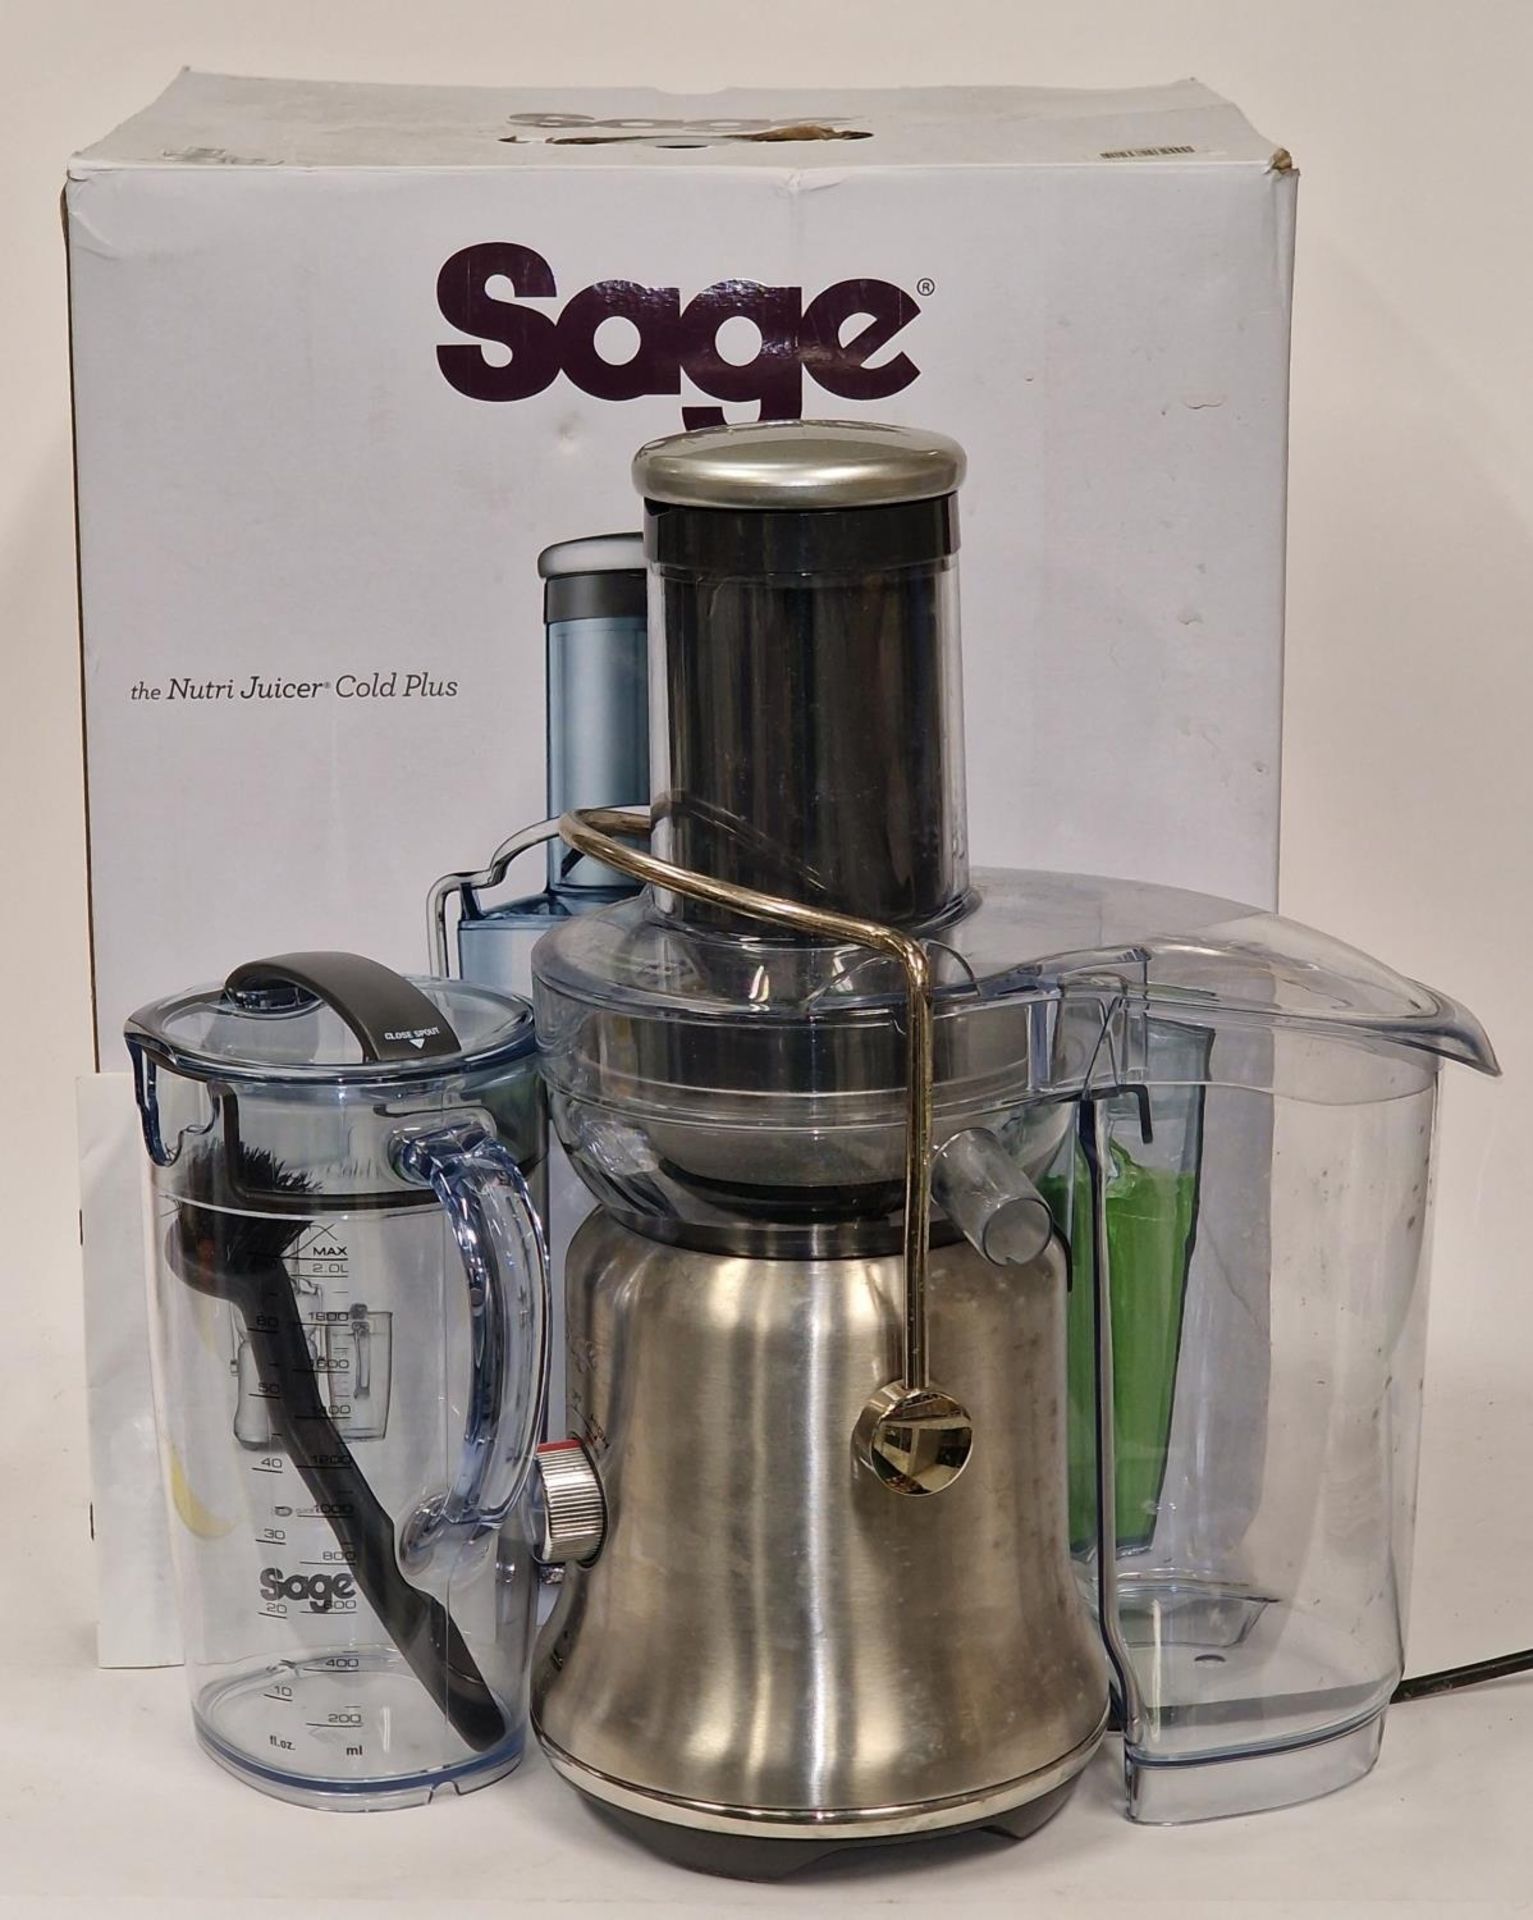 Sage Nutri Juicer Cold Plus electric juicer with box and instructions.